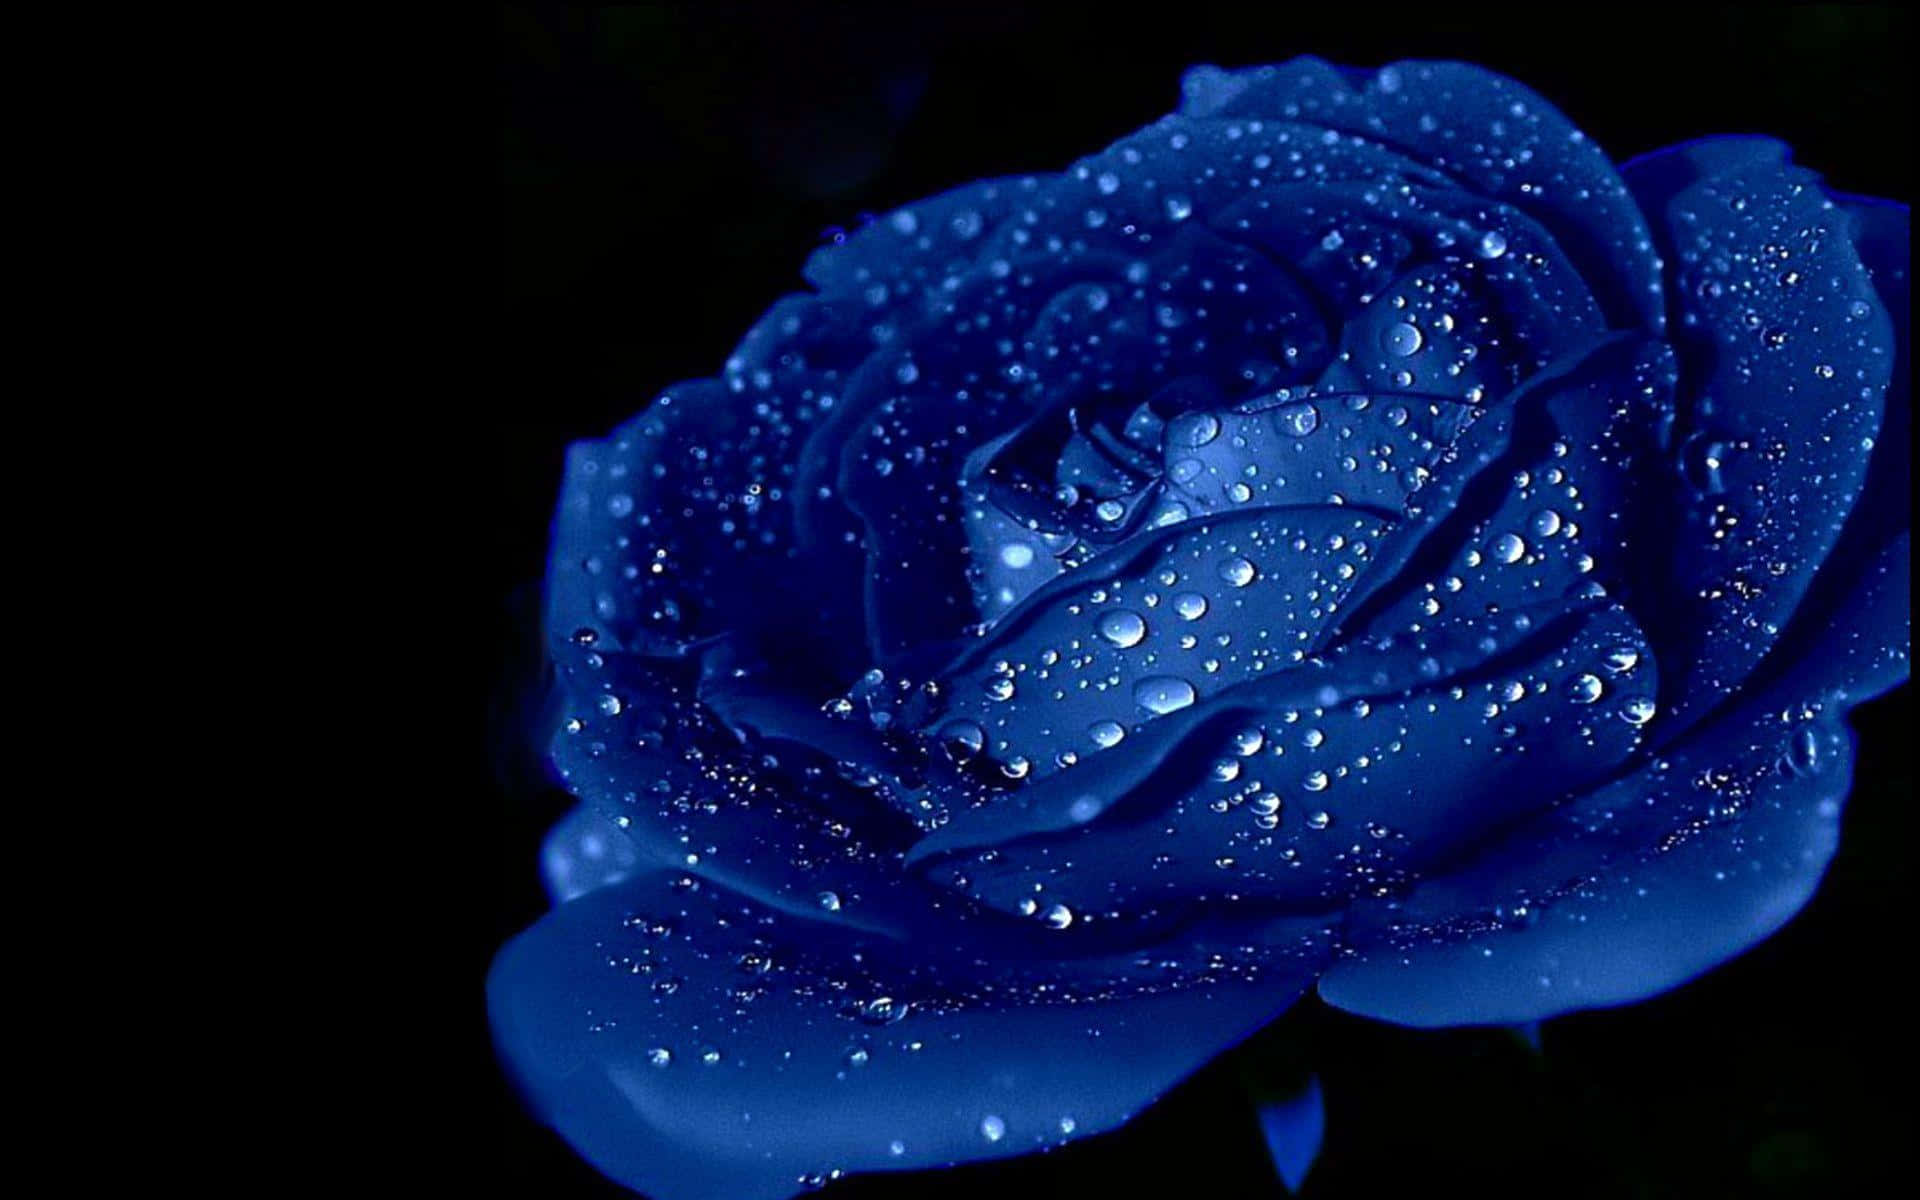 "Allow the beauty of the Blue Rose to bring color and life to your world." Wallpaper